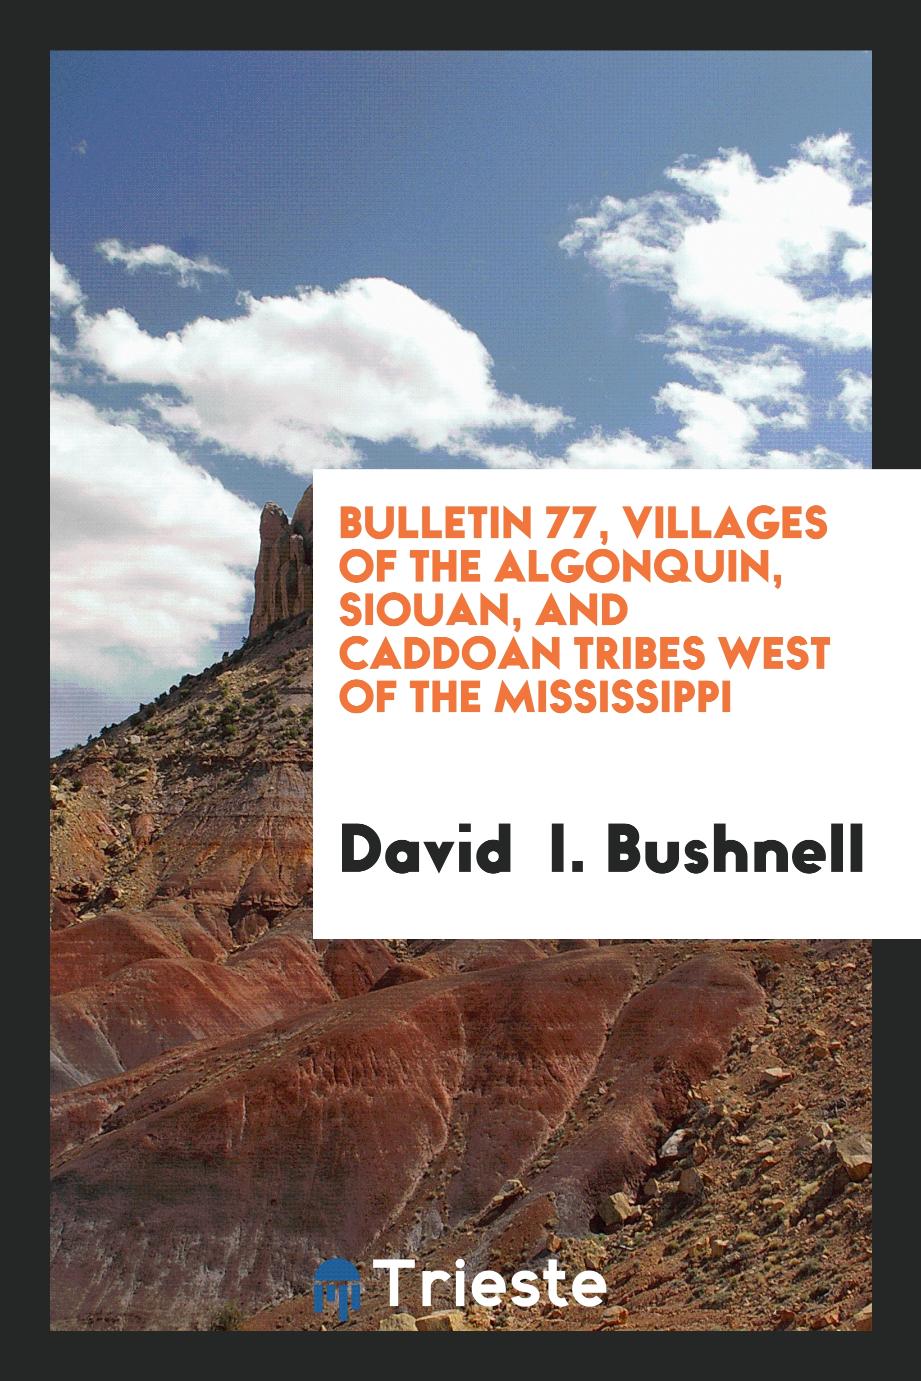 Bulletin 77, Villages of the algonquin, siouan, and caddoan tribes west of the Mississippi